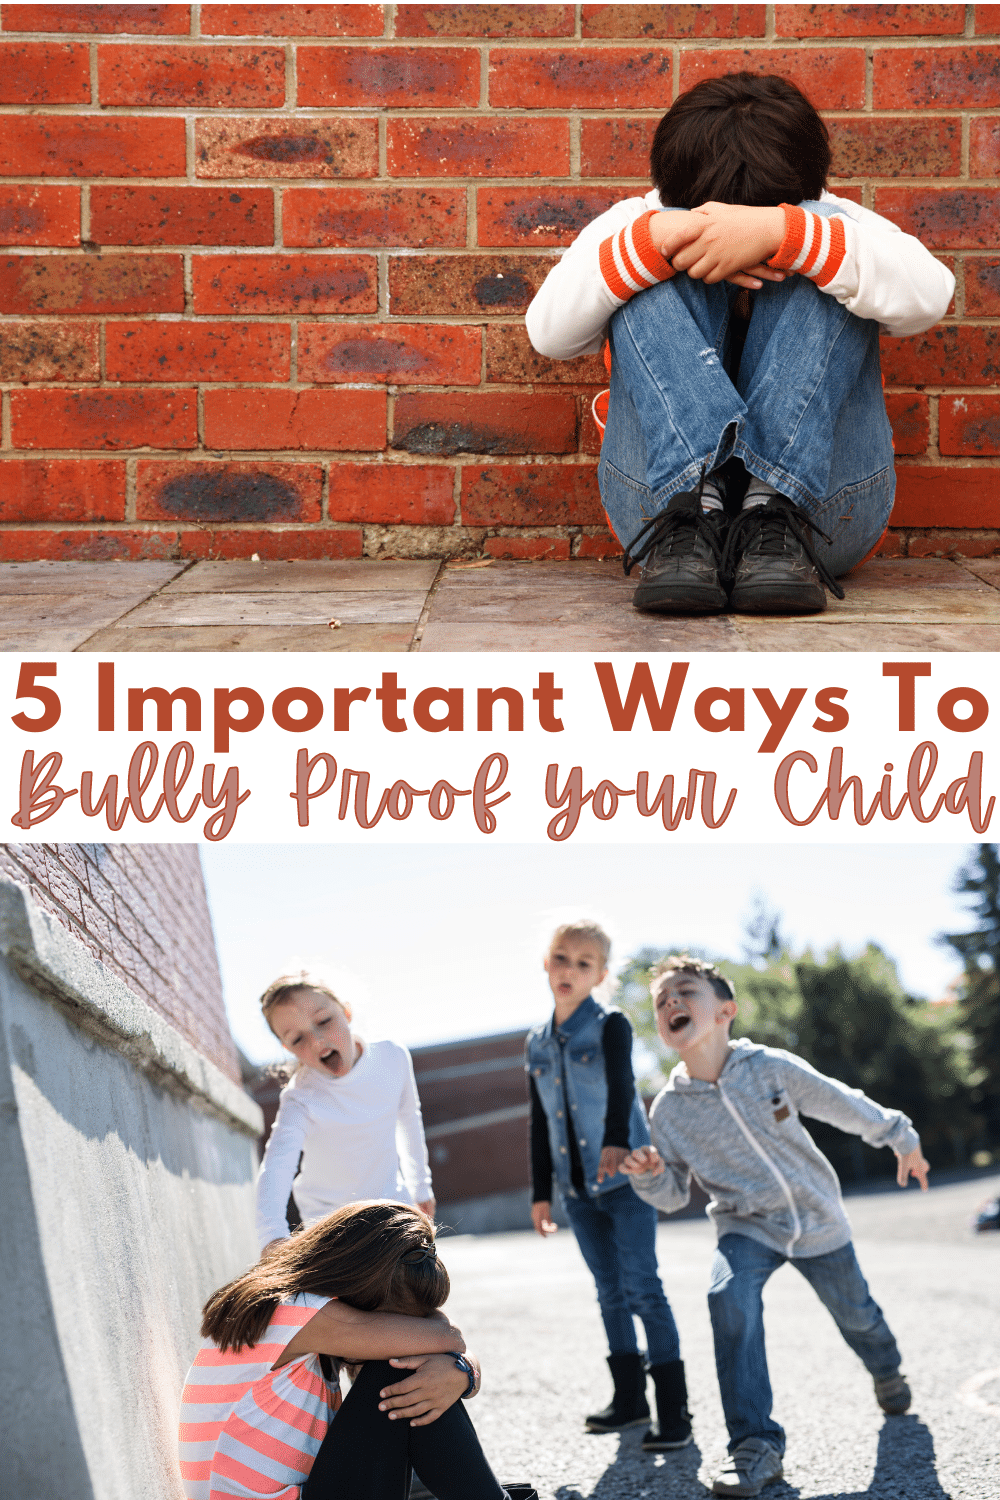 Simple, practical strategies to help your child be bully proof, confident, and capable of navigating challenging social situations. #parenting #antibullying #wondermomwannabe via @wondermomwannab